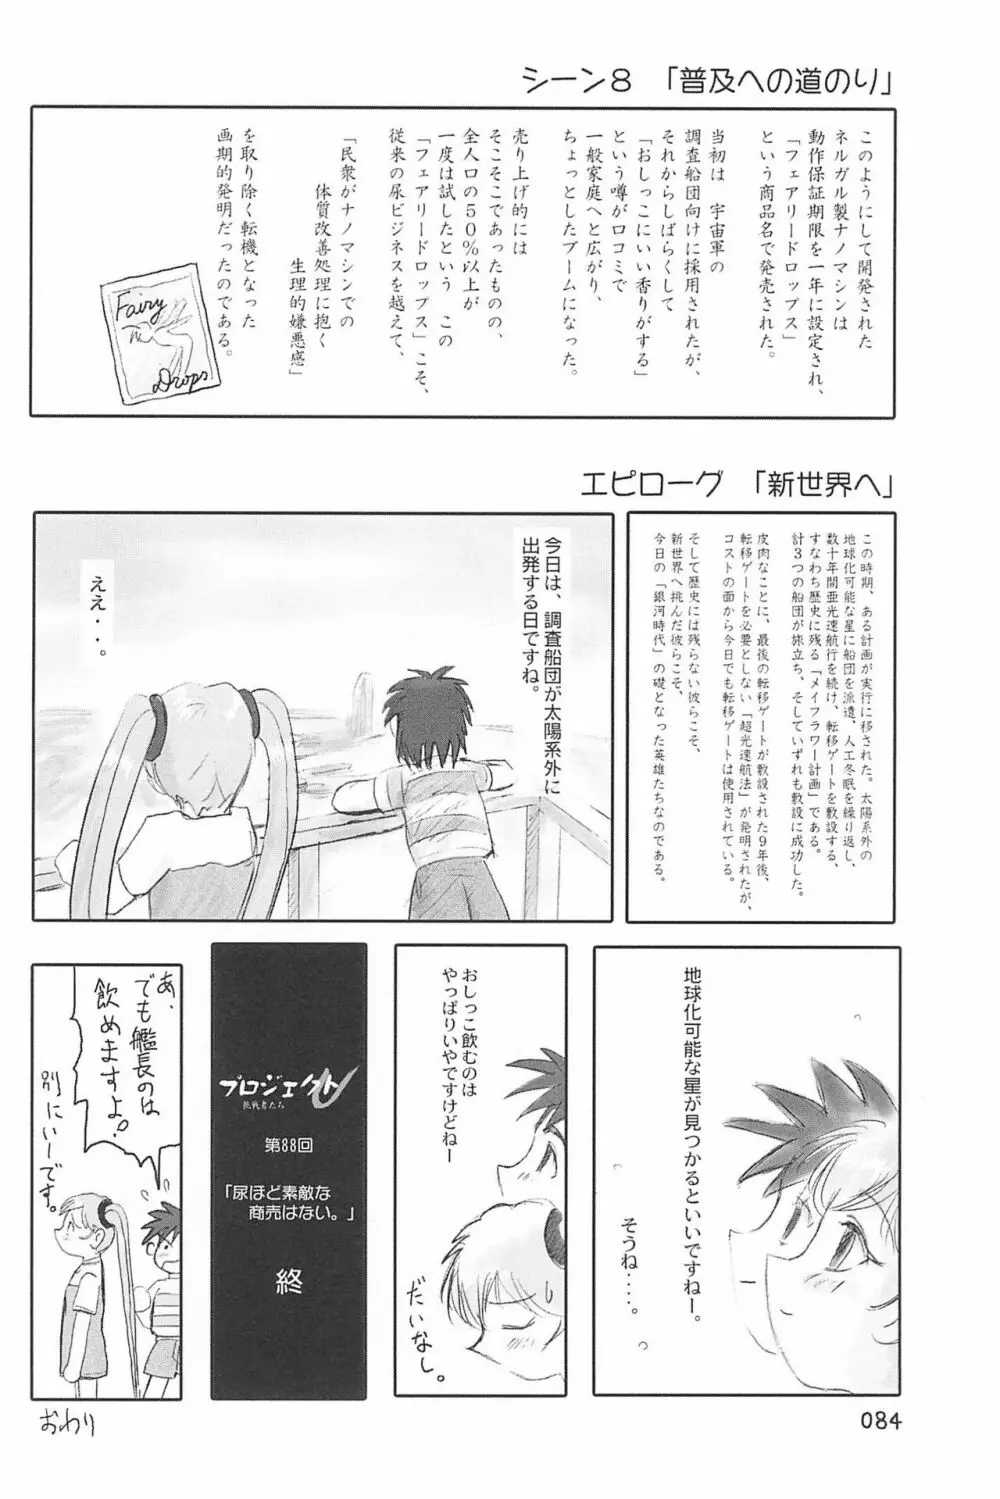 ND-special Volume 4 84ページ